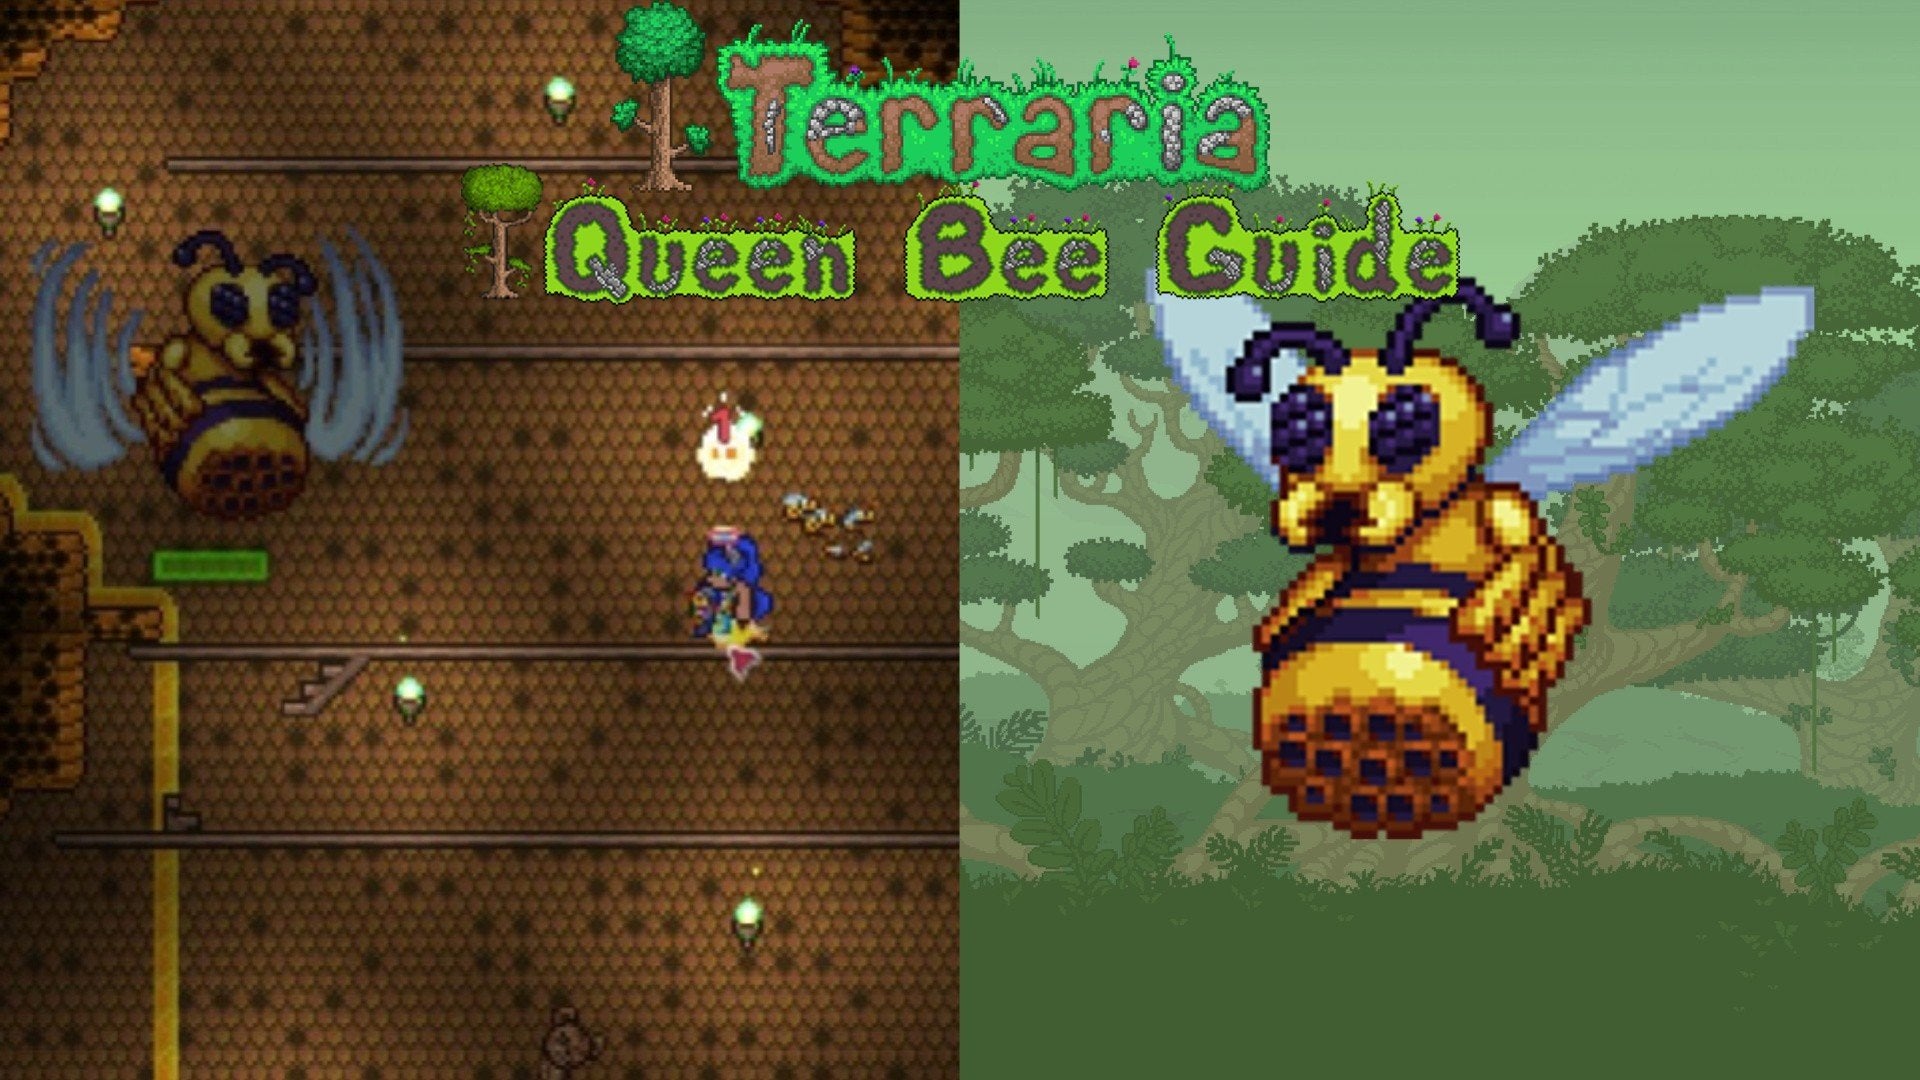 On the left is the player underground and on the right is the Bee Queen boss in Terraria.